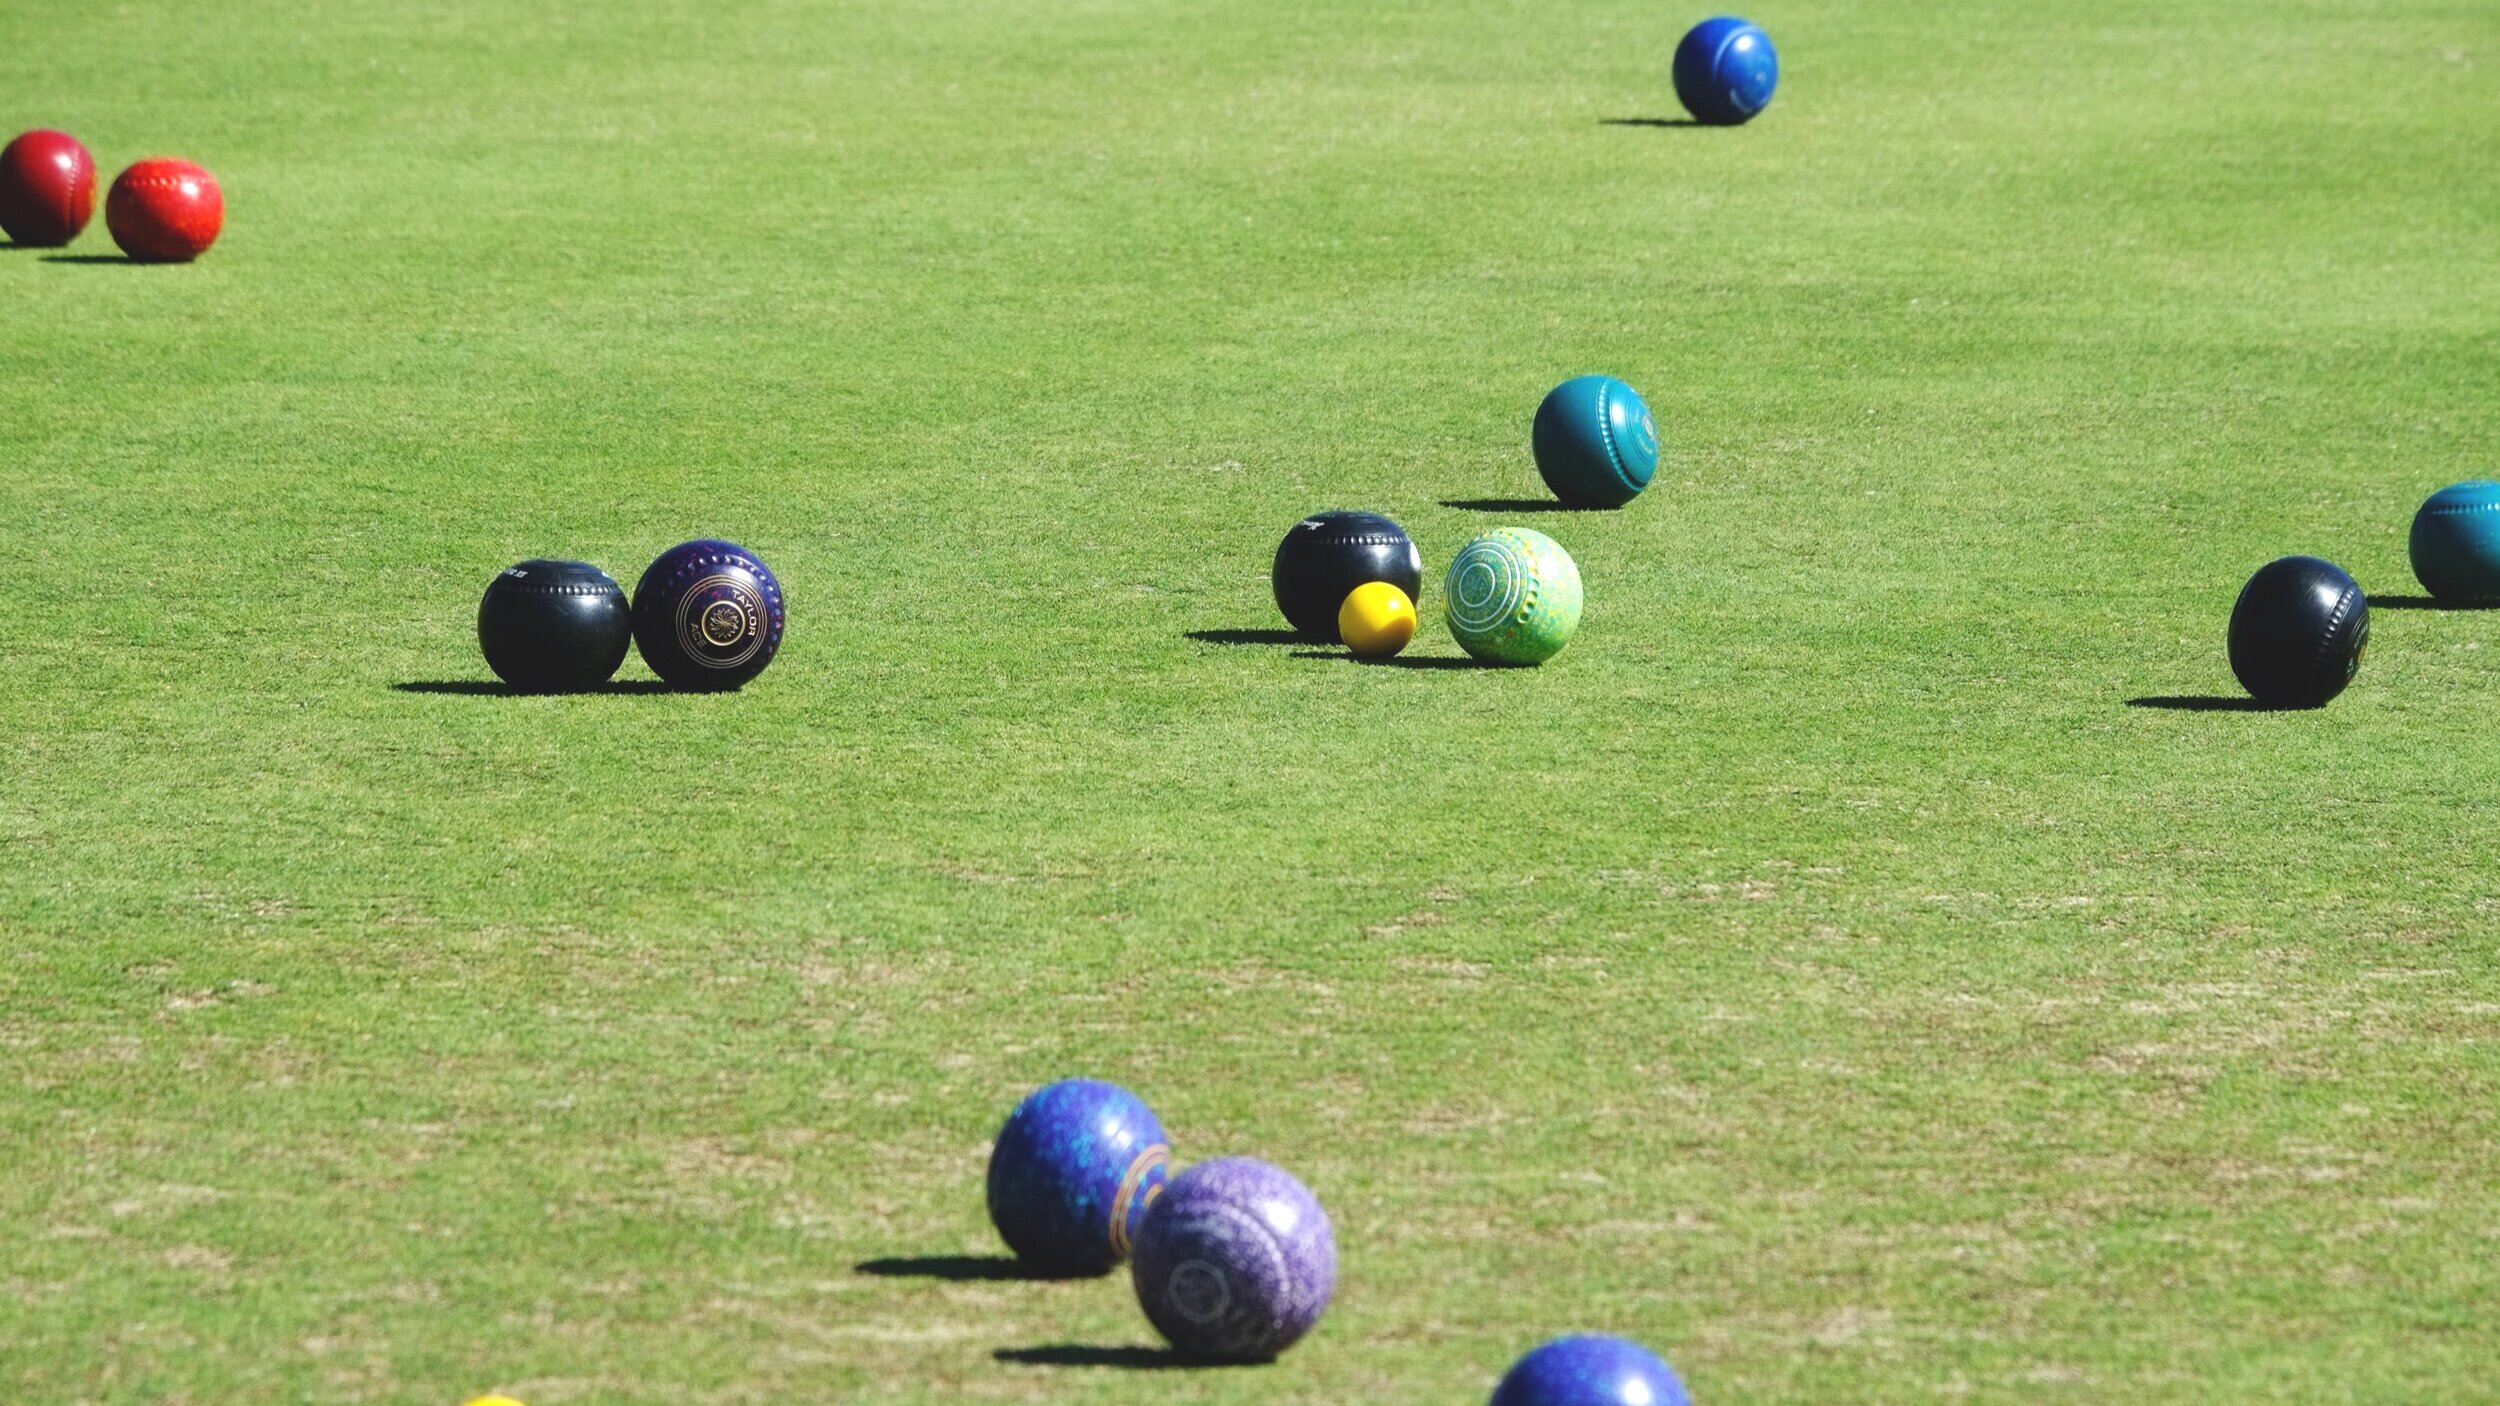 Lawn Bowling Indoors and Outdoors